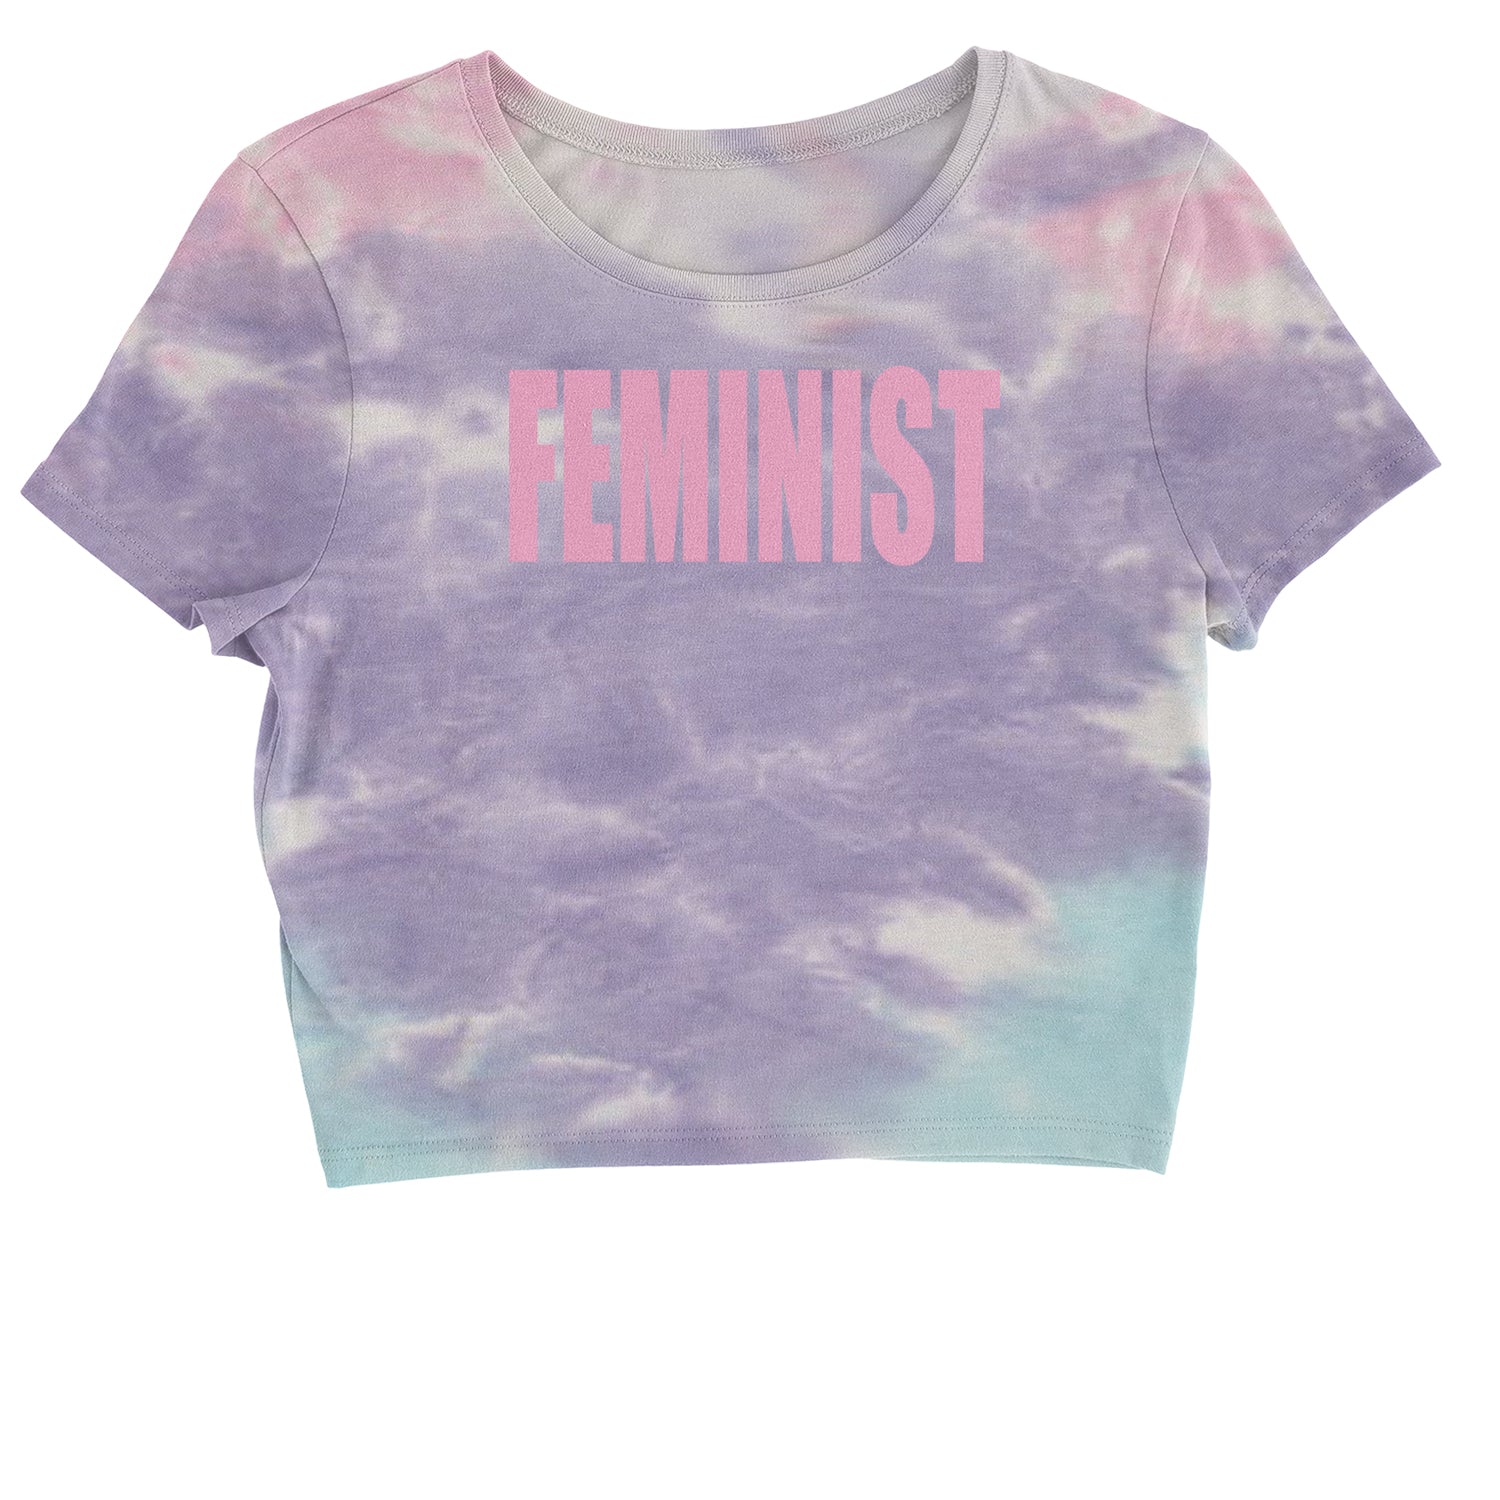 Feminist (Pink Print) Cropped T-Shirt a, equal, equality, feminism, feminist, gender, is, lgbtq, like, looks, nevertheless, pay, persisted, rights, she, this, what by Expression Tees